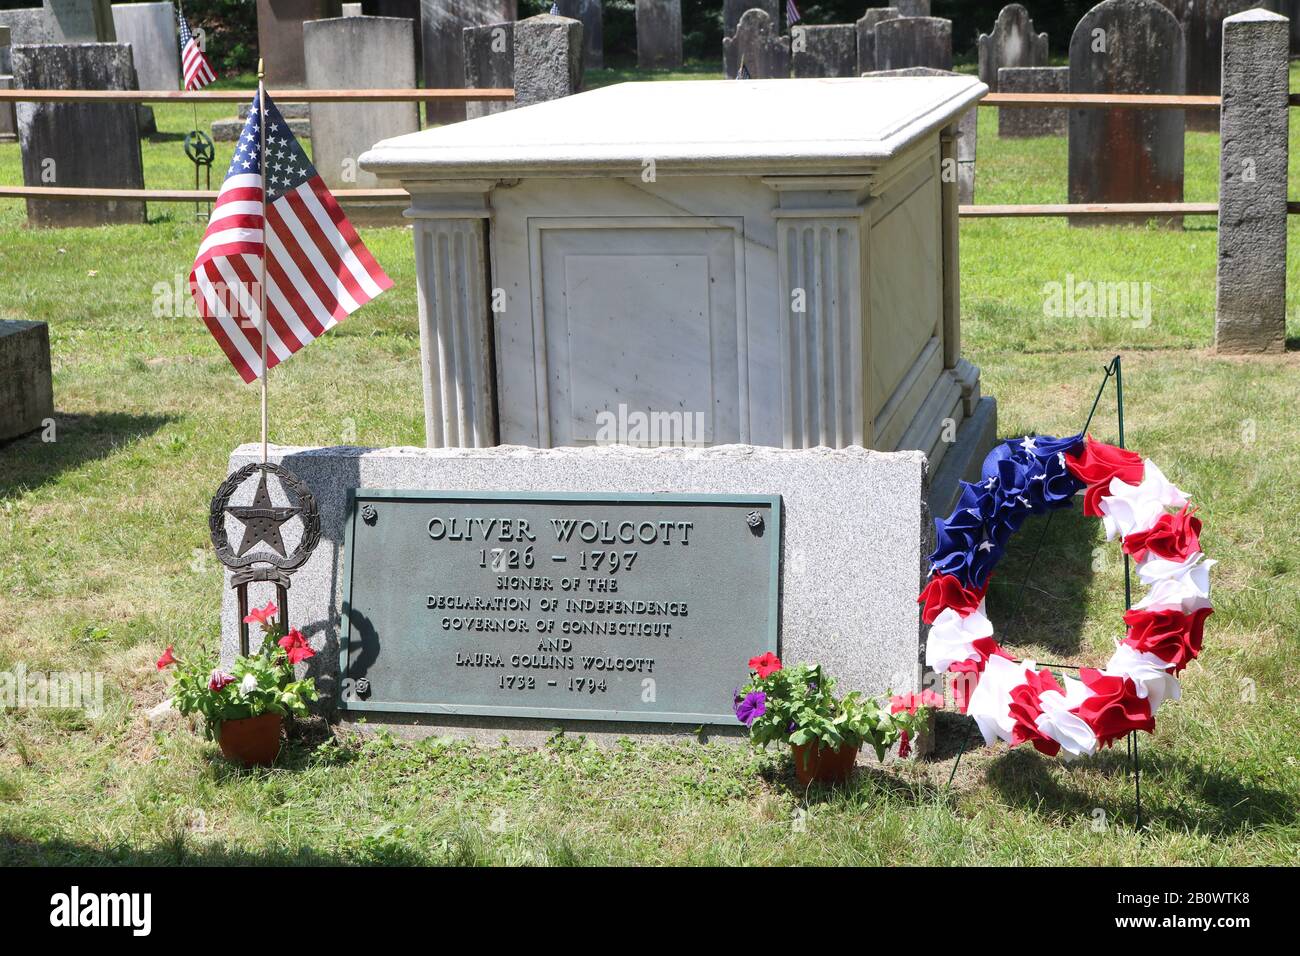 Gravesite of Oliver Wolcott, signer of the US Declaration of Independence from Connecticut. Located in East Cemetery in Litchfield, CT. Stock Photo